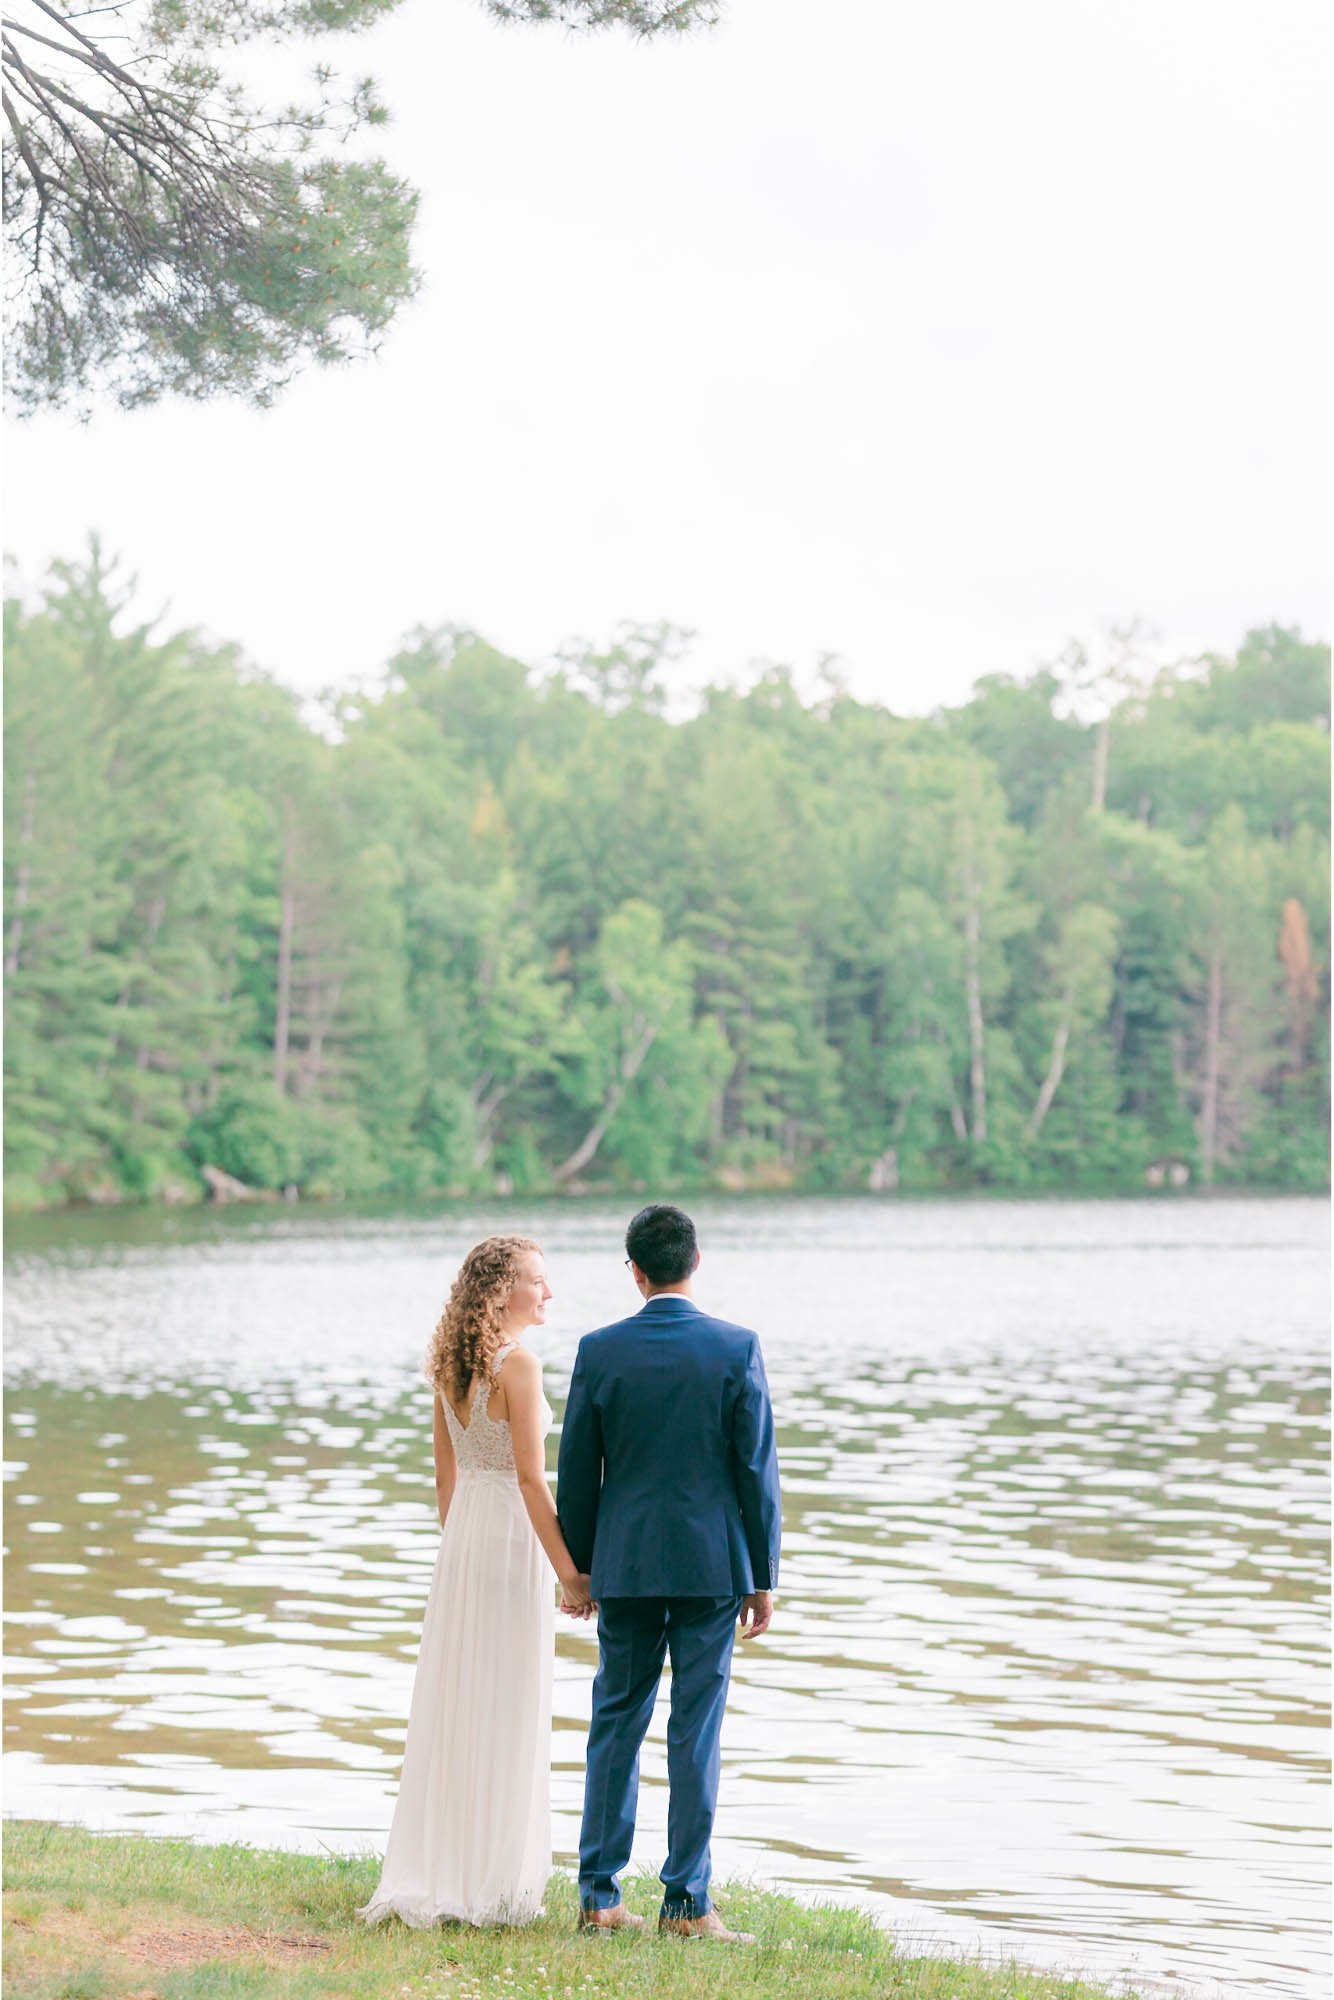 jessica-kovach-photography-lakeside-wisconsin-small-and-intimate-wedding-elopement-with-friends-and-family-211.jpg